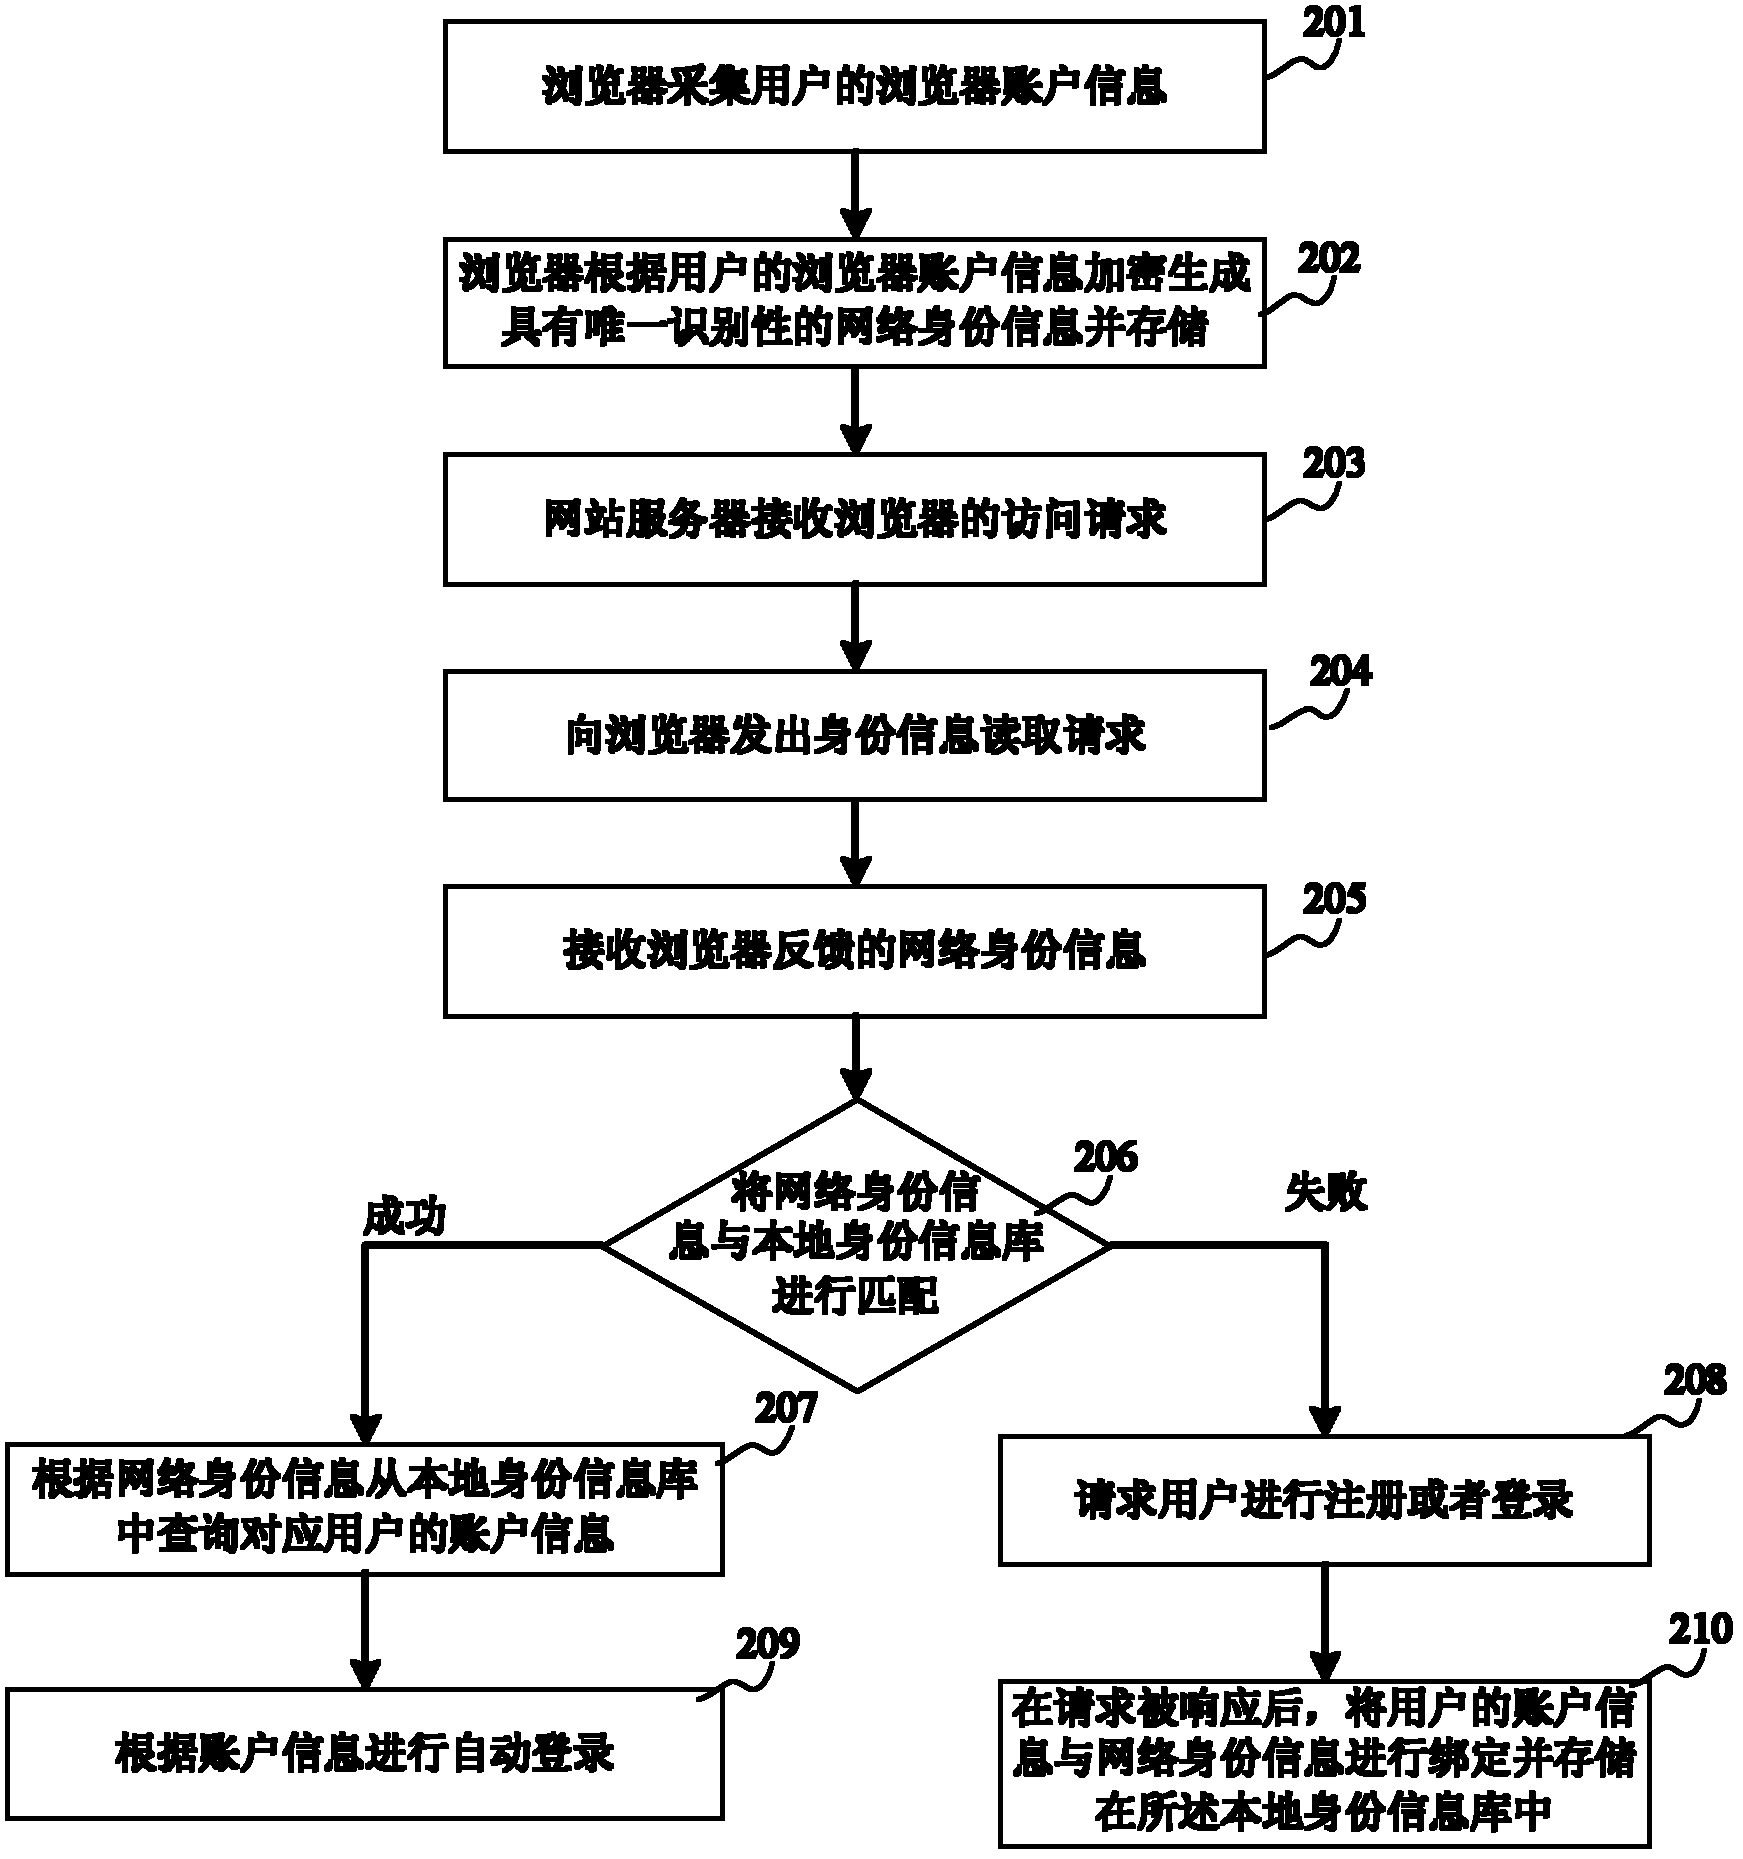 Method and device for providing network service